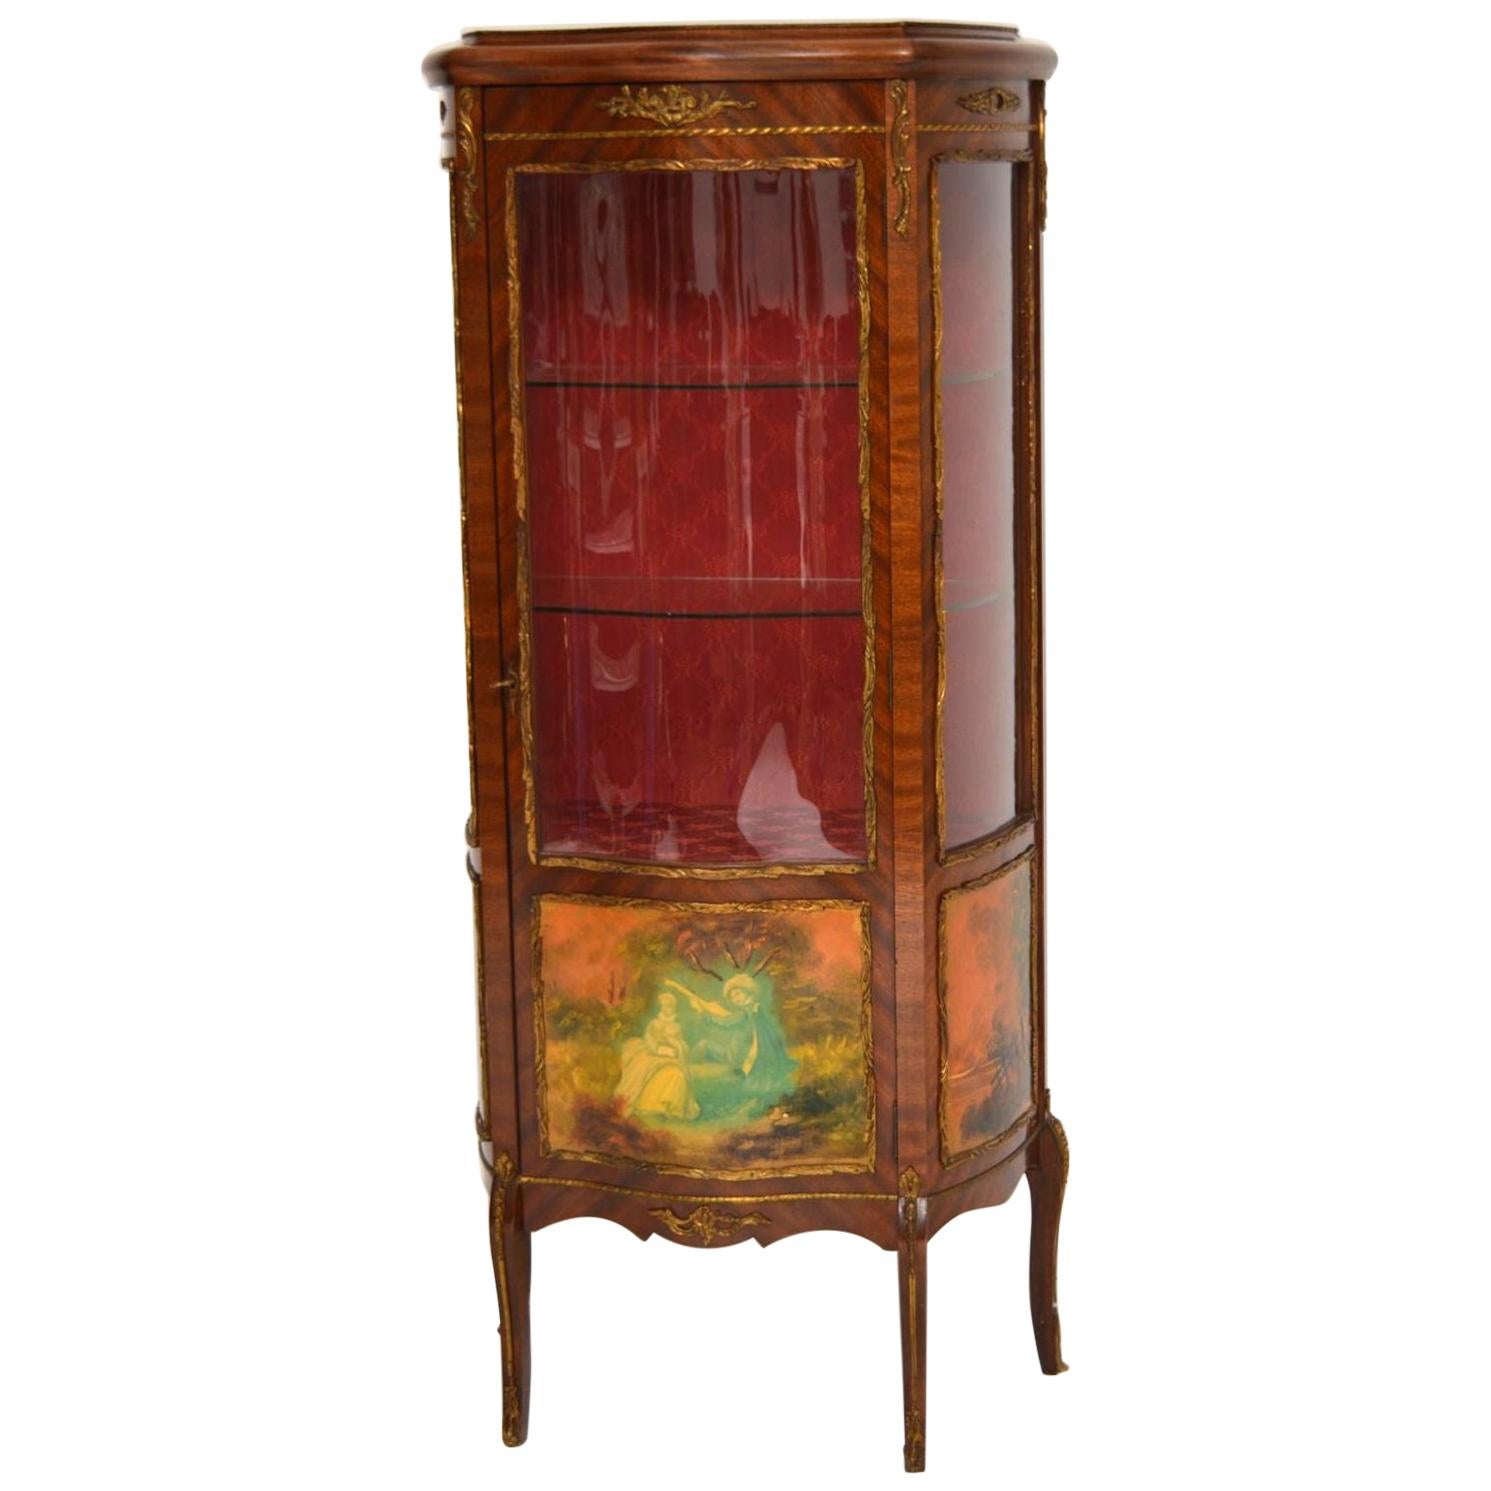 Antique French Style Ormolu Mounted Display Cabinet